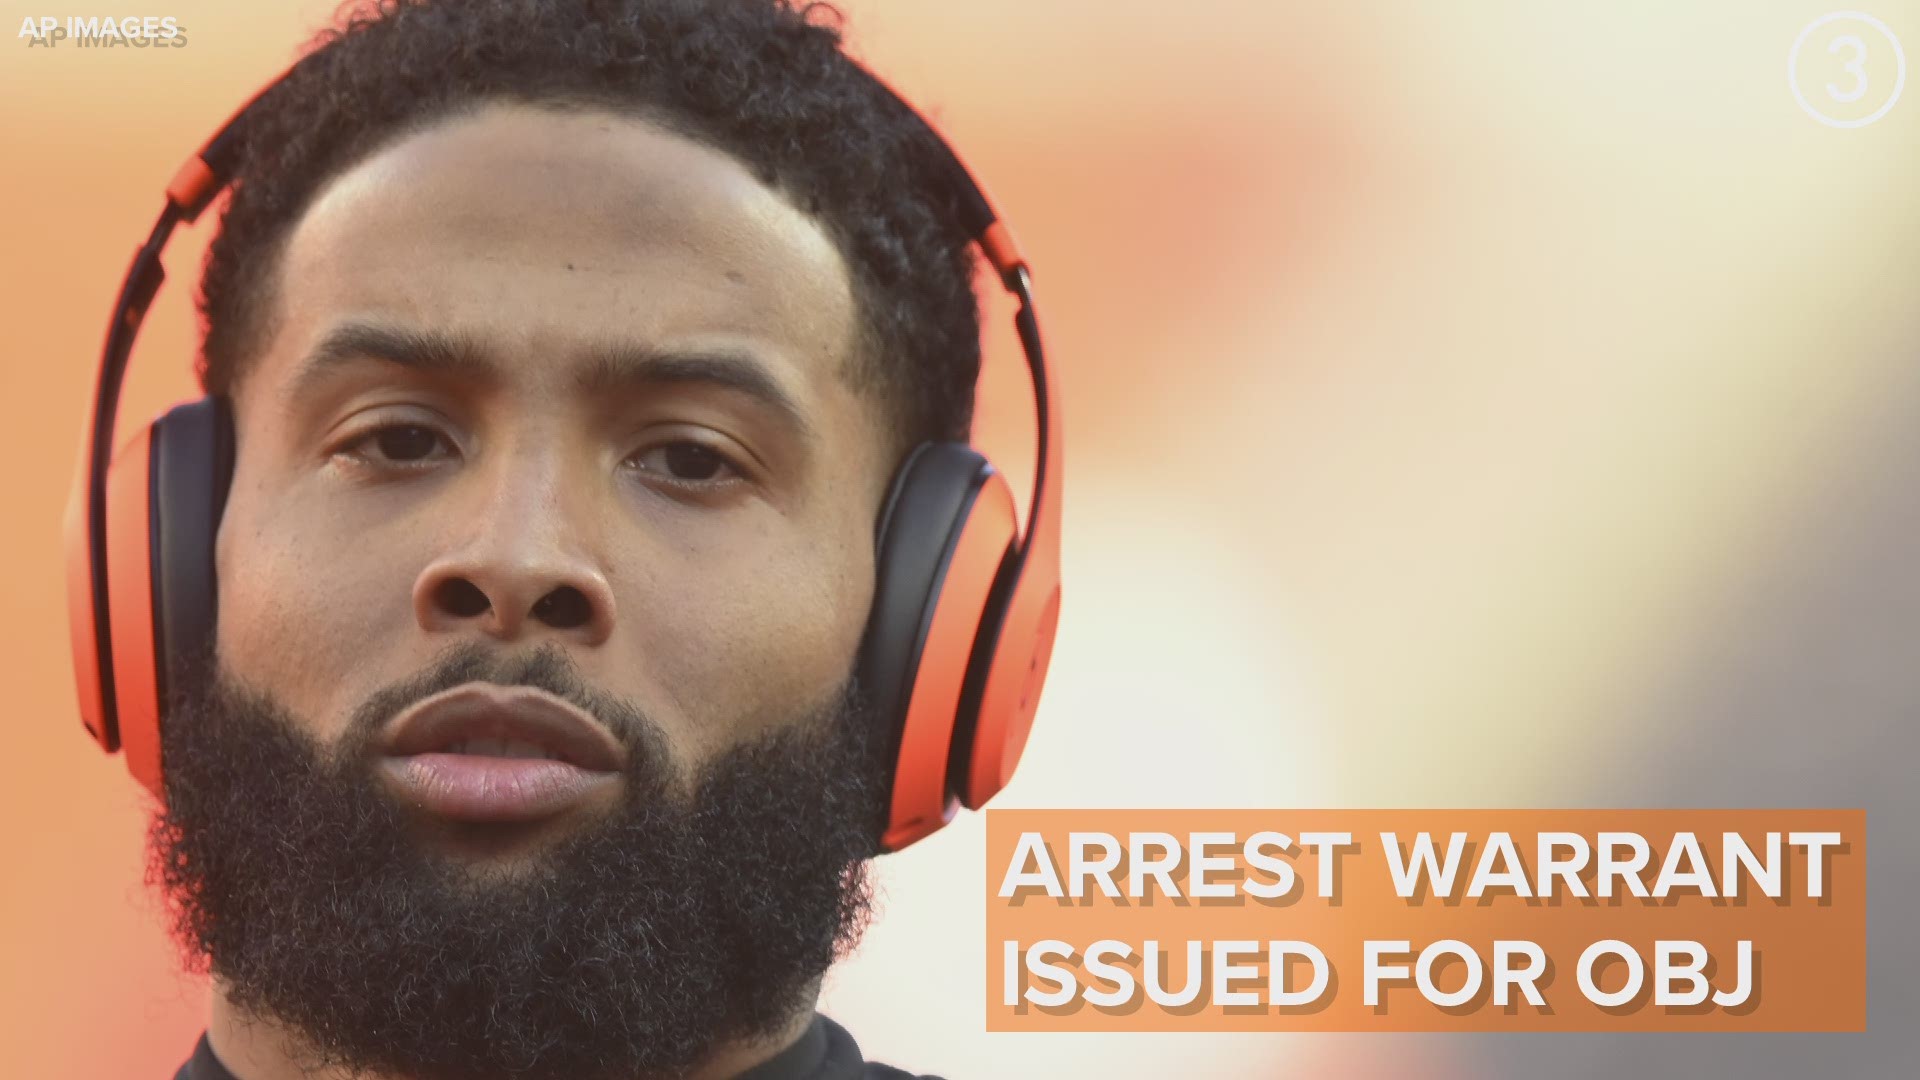 Trouble for OBJ in New Orleans.  According to NOLA.com, an arrest warrant has been issued for Cleveland Browns wide receiver Odell Beckham Jr.